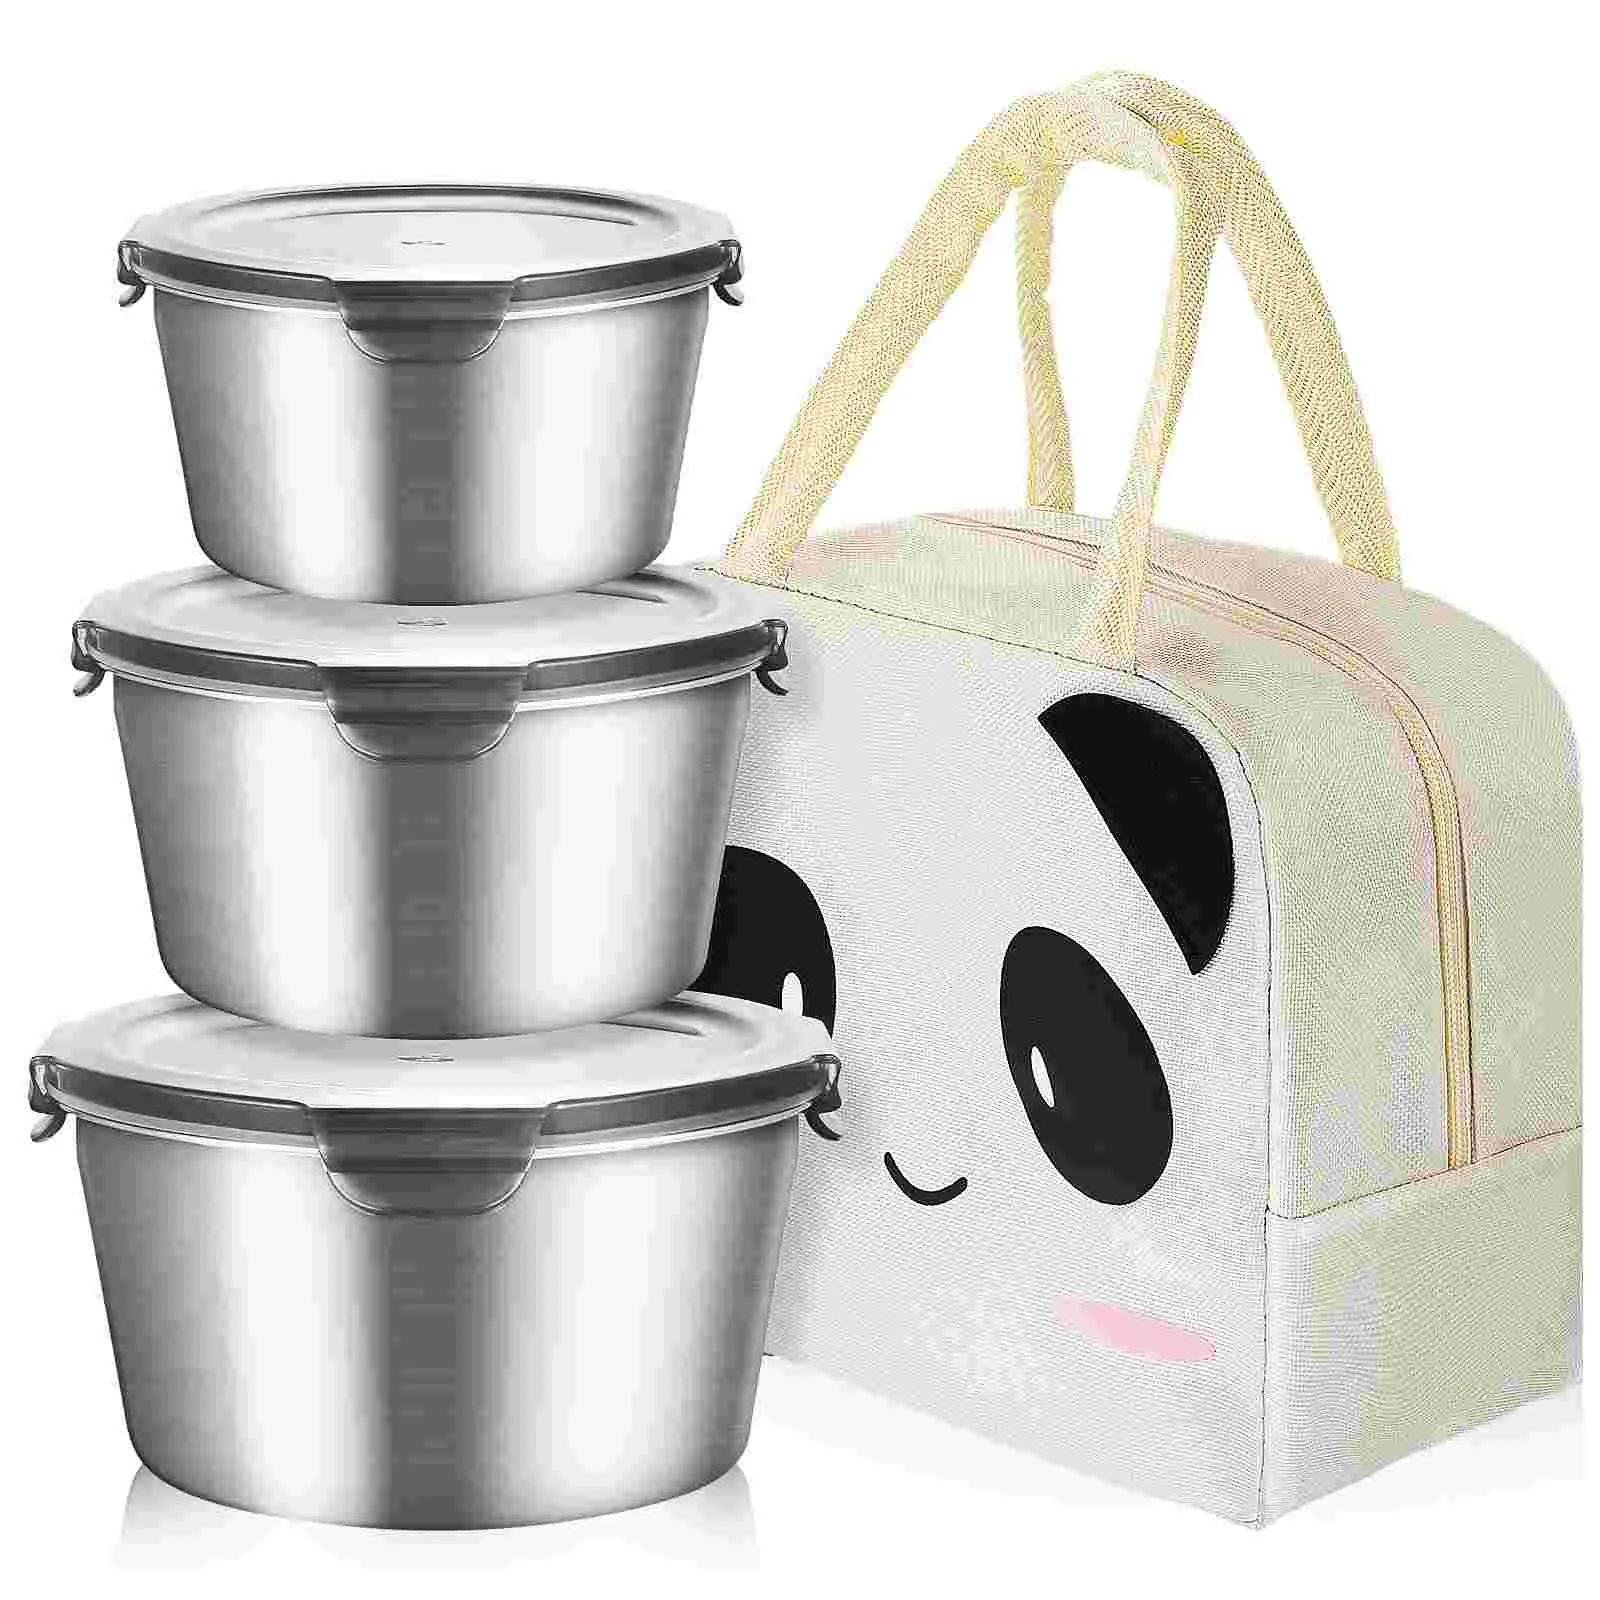 

3Pcs Stainless Steel Lunch Box 400/600/1100ML Bento Case Food Storage Containers with Insulated Bag